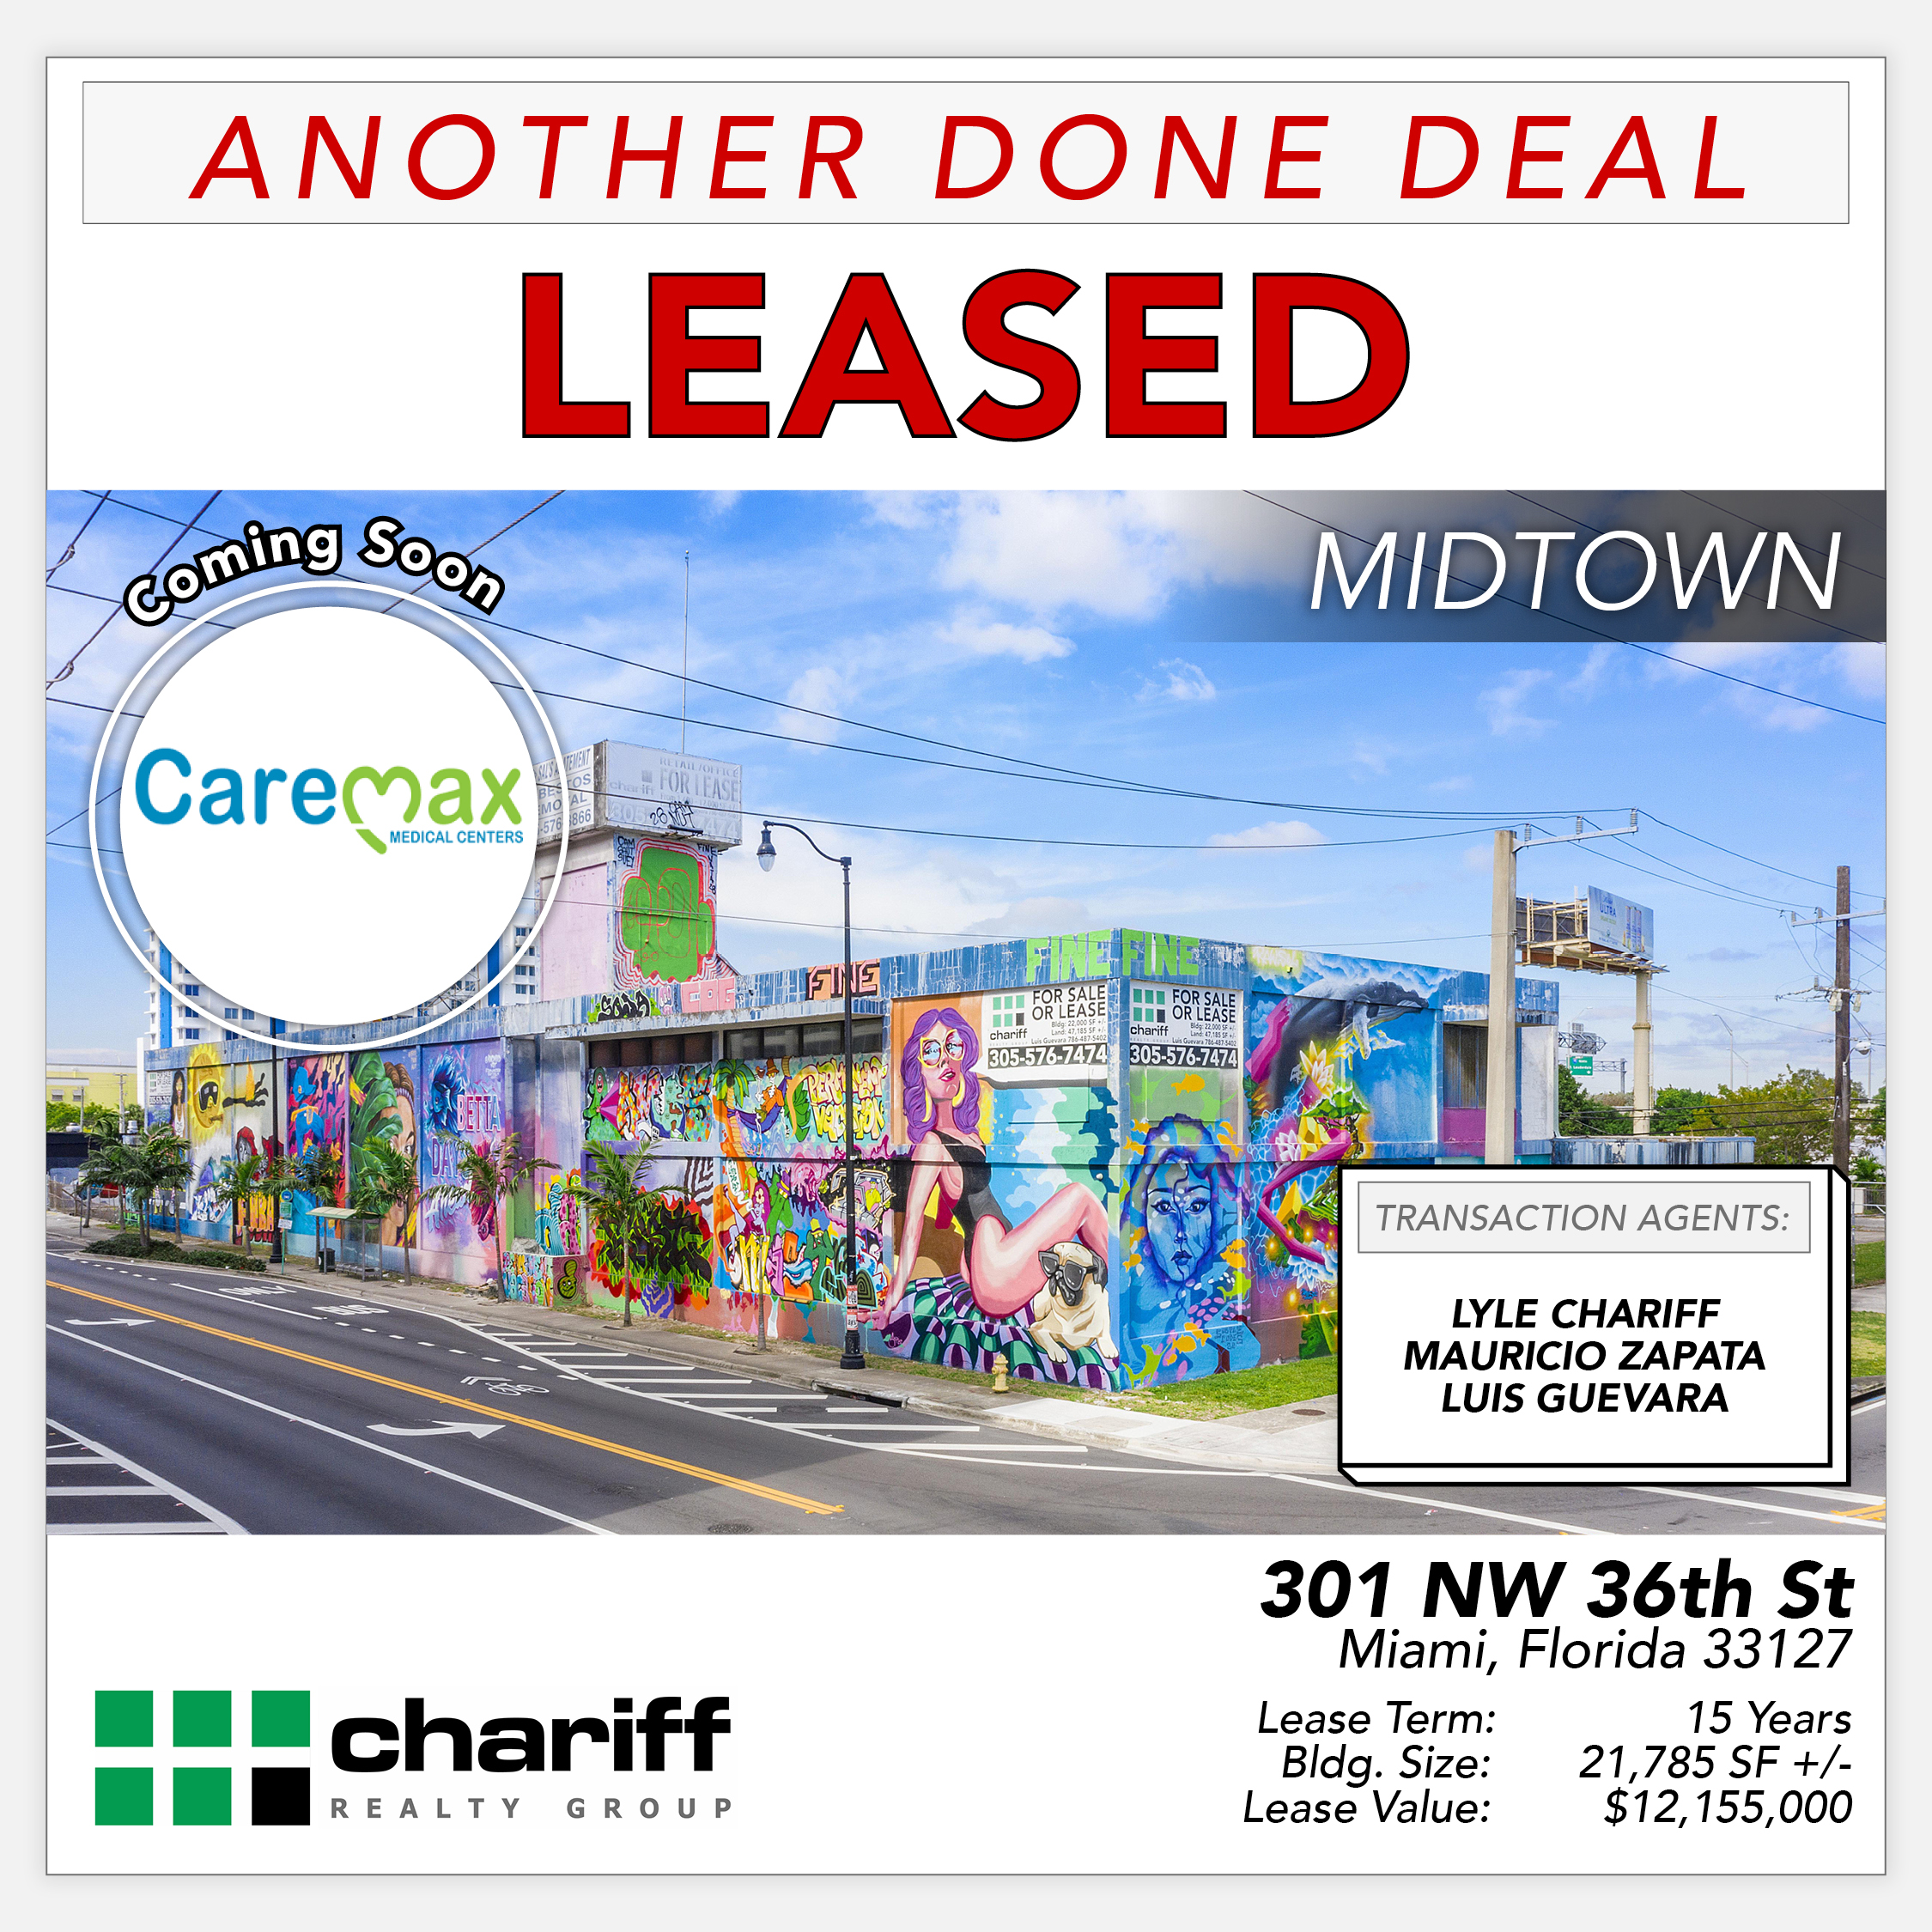 301 NW 36th St - Another Done Deal - Leased - Midtown - Miami-Florida-33127-Chariff Realty Group